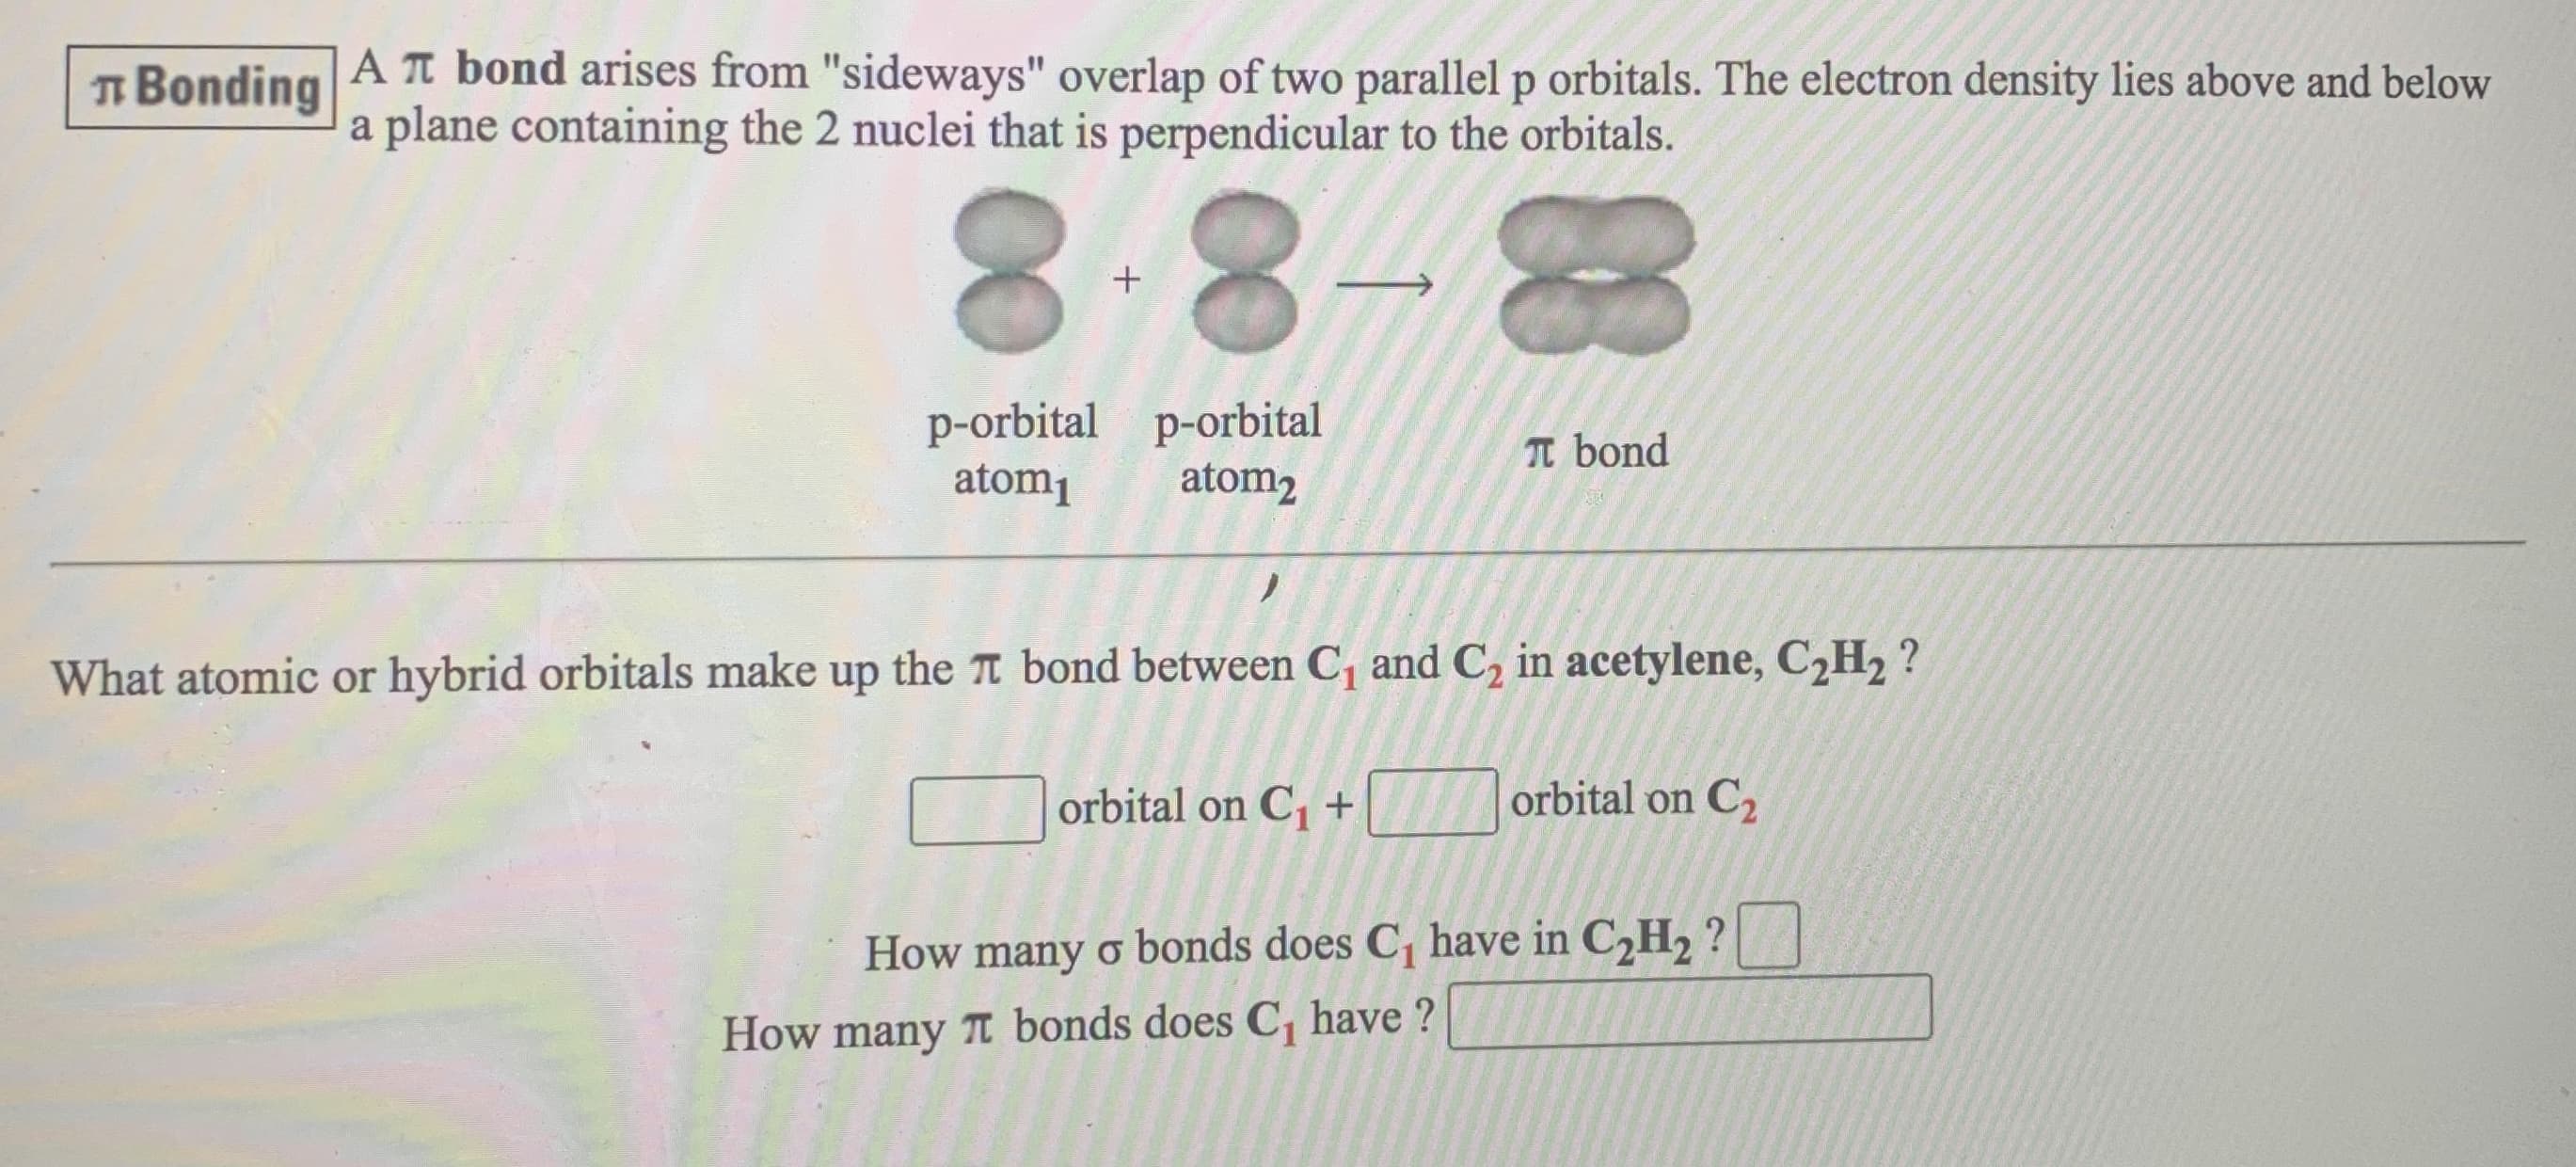 I Bonding
A T bond arises from "sideways" overlap of two parallel p orbitals. The electron density lies above and below
a plane containing the 2 nuclei that is perpendicular to the orbitals.
8.8
p-orbital p-orbital
T bond
atom1
atom2
What atomic or hybrid orbitals make up the T bond between C, and C, in acetylene, C,H, ?
orbital on C, +
orbital on C2
How many o bonds does C, have in C,H, ?
How many T bonds does C, have ?
